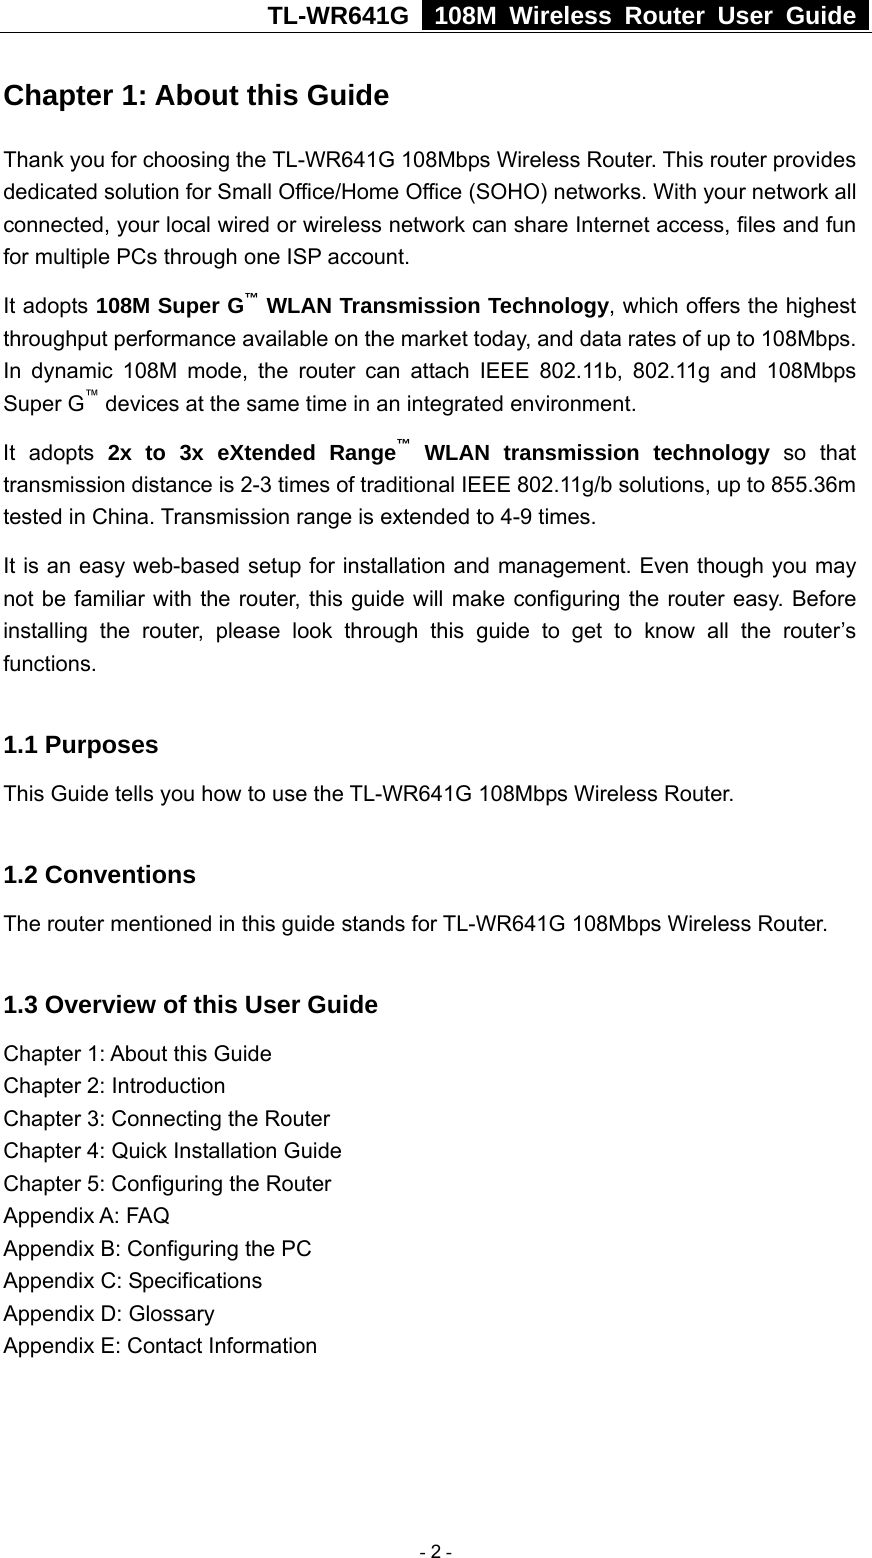 TL-WR641G   108M Wireless Router User Guide  Chapter 1: About this Guide Thank you for choosing the TL-WR641G 108Mbps Wireless Router. This router provides dedicated solution for Small Office/Home Office (SOHO) networks. With your network all connected, your local wired or wireless network can share Internet access, files and fun for multiple PCs through one ISP account.     It adopts 108M Super G™ WLAN Transmission Technology, which offers the highest throughput performance available on the market today, and data rates of up to 108Mbps. In dynamic 108M mode, the router can attach IEEE 802.11b, 802.11g and 108Mbps Super G™ devices at the same time in an integrated environment. It adopts 2x to 3x eXtended Range™ WLAN transmission technology so that transmission distance is 2-3 times of traditional IEEE 802.11g/b solutions, up to 855.36m tested in China. Transmission range is extended to 4-9 times. It is an easy web-based setup for installation and management. Even though you may not be familiar with the router, this guide will make configuring the router easy. Before installing the router, please look through this guide to get to know all the router’s functions.  1.1 Purposes This Guide tells you how to use the TL-WR641G 108Mbps Wireless Router.    1.2 Conventions The router mentioned in this guide stands for TL-WR641G 108Mbps Wireless Router.  1.3 Overview of this User Guide Chapter 1: About this Guide Chapter 2: Introduction Chapter 3: Connecting the Router Chapter 4: Quick Installation Guide Chapter 5: Configuring the Router Appendix A: FAQ Appendix B: Configuring the PC Appendix C: Specifications Appendix D: Glossary Appendix E: Contact Information  - 2 - 